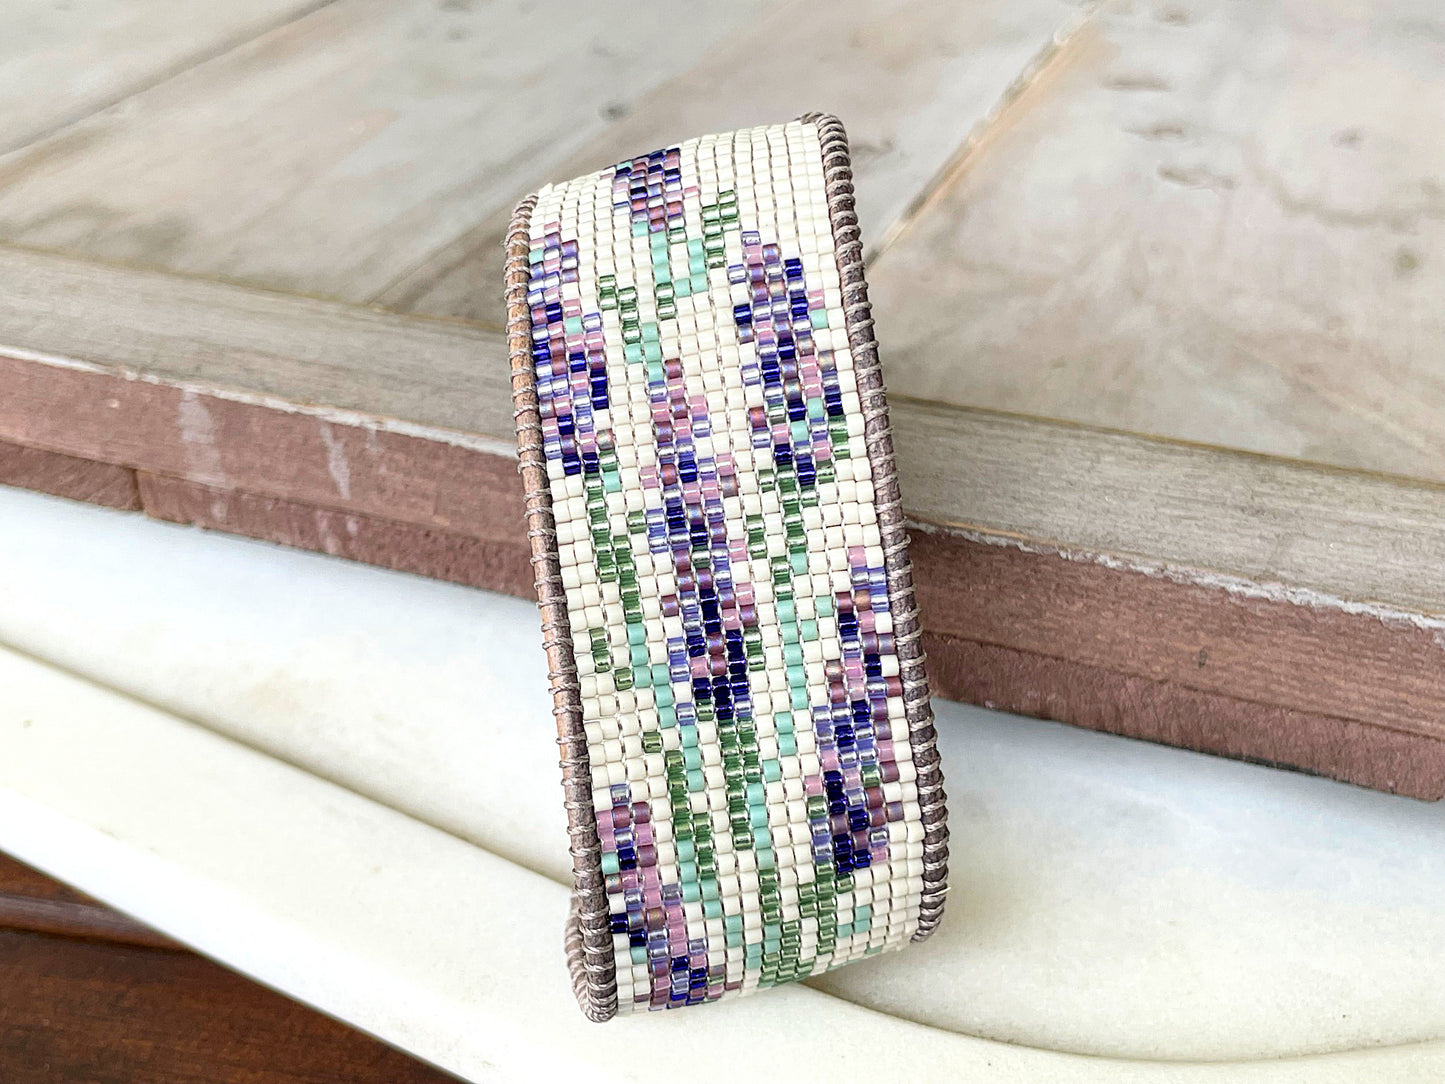 Lavender Floral Bead Loom Woven Bracelet with Leather Trim